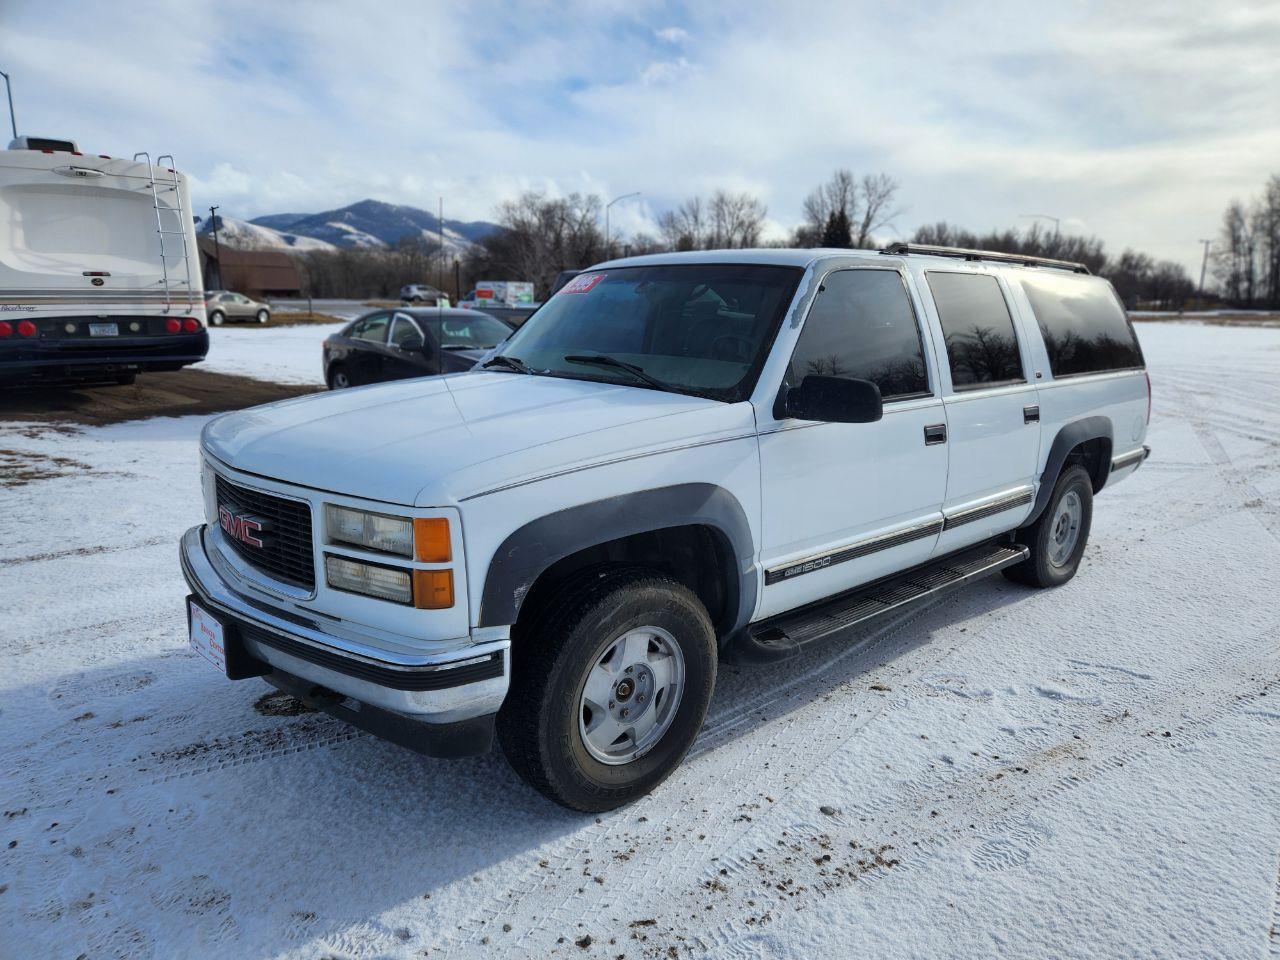 For Sale: 1999 GMC Suburban in Lolo, Montana for sale in Lolo, MT